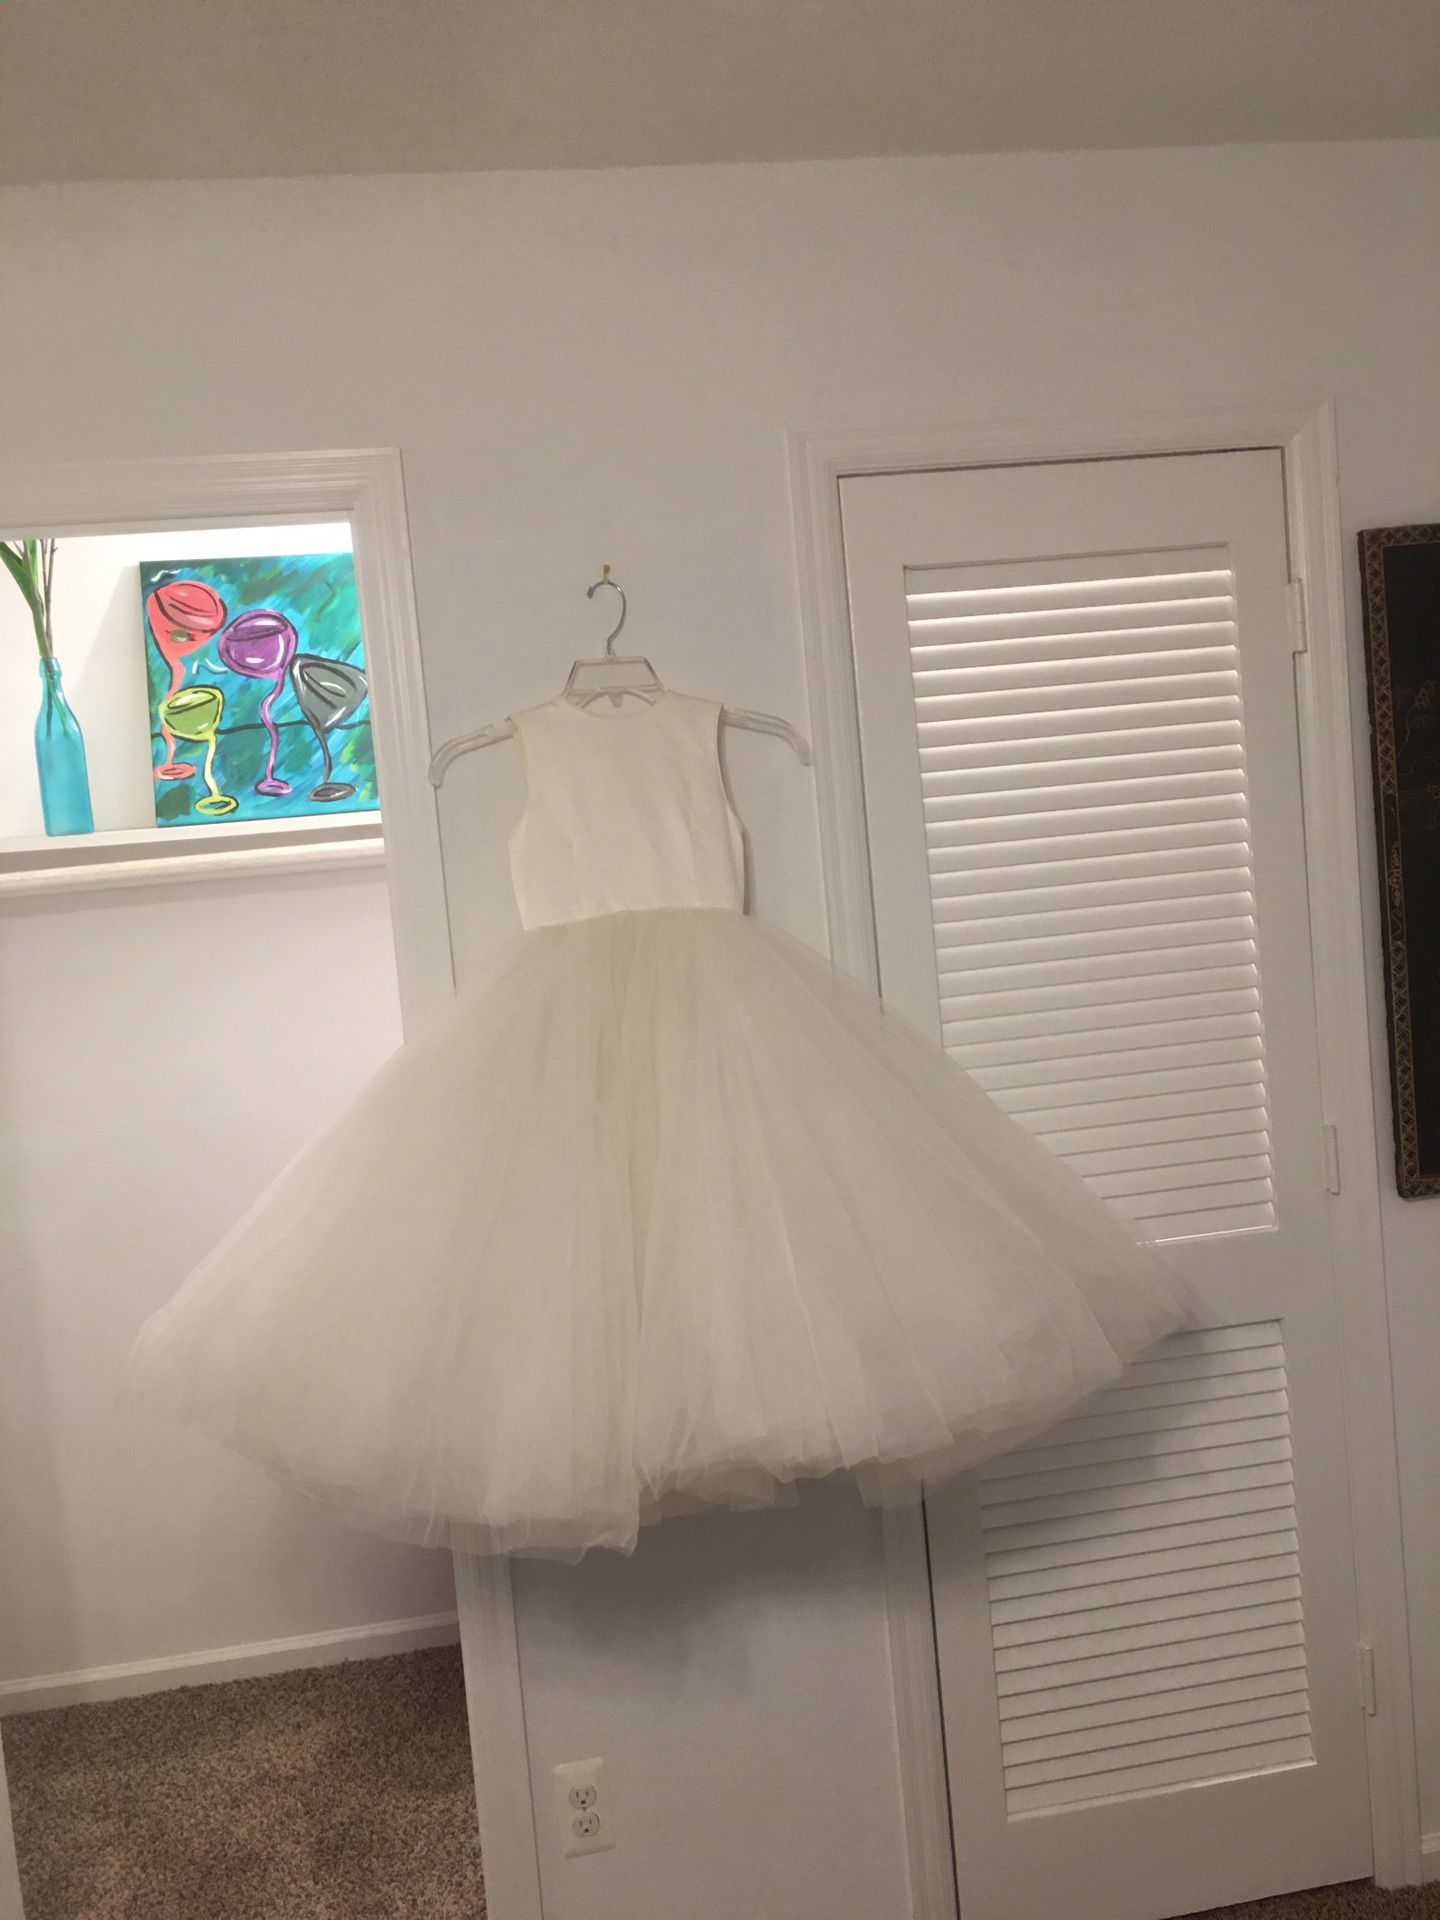 Bridal Suite (Wedding Dress and Flower girl dress with shoes and corset_